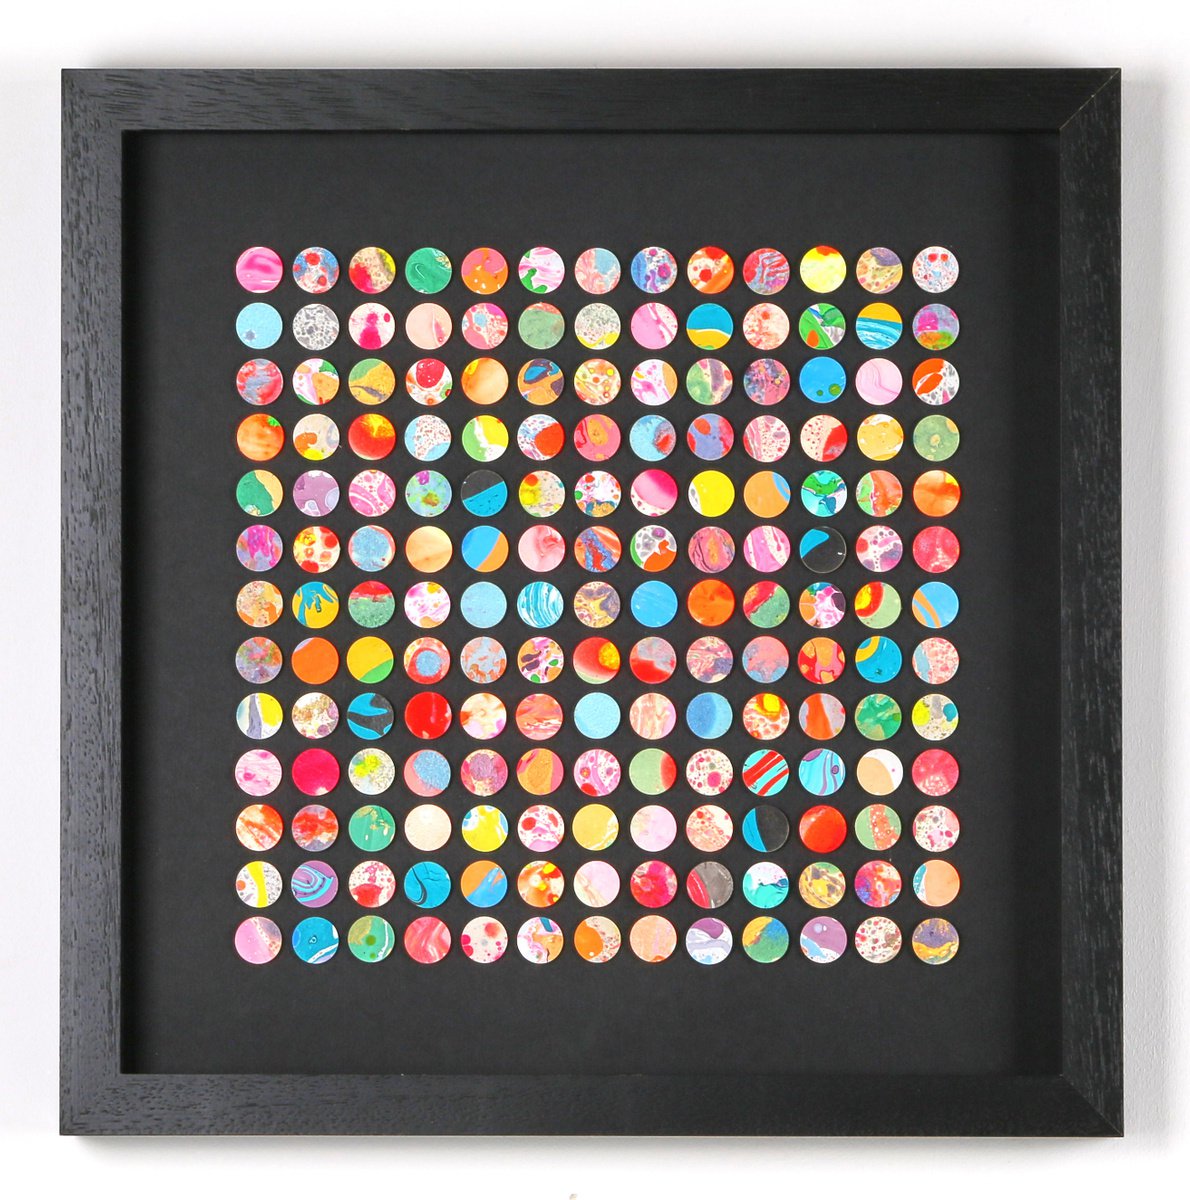 169 marble dots 3D geometric collage painting by Amelia Coward